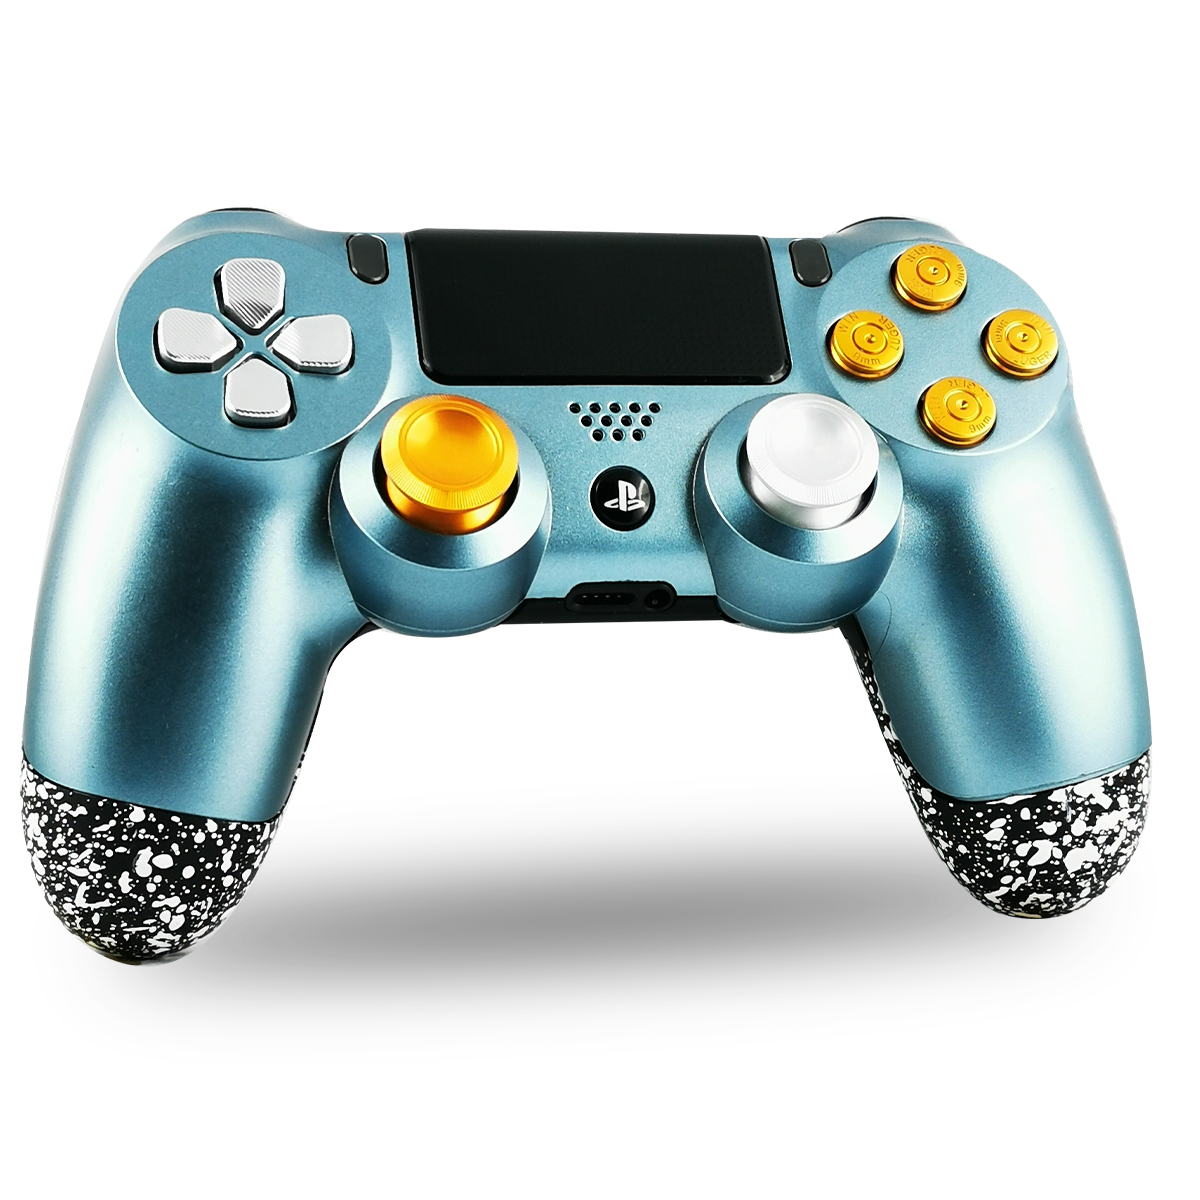 manette-PS4-custom-playstation-4-sony-personnalisee-drawmypad-inconnu18